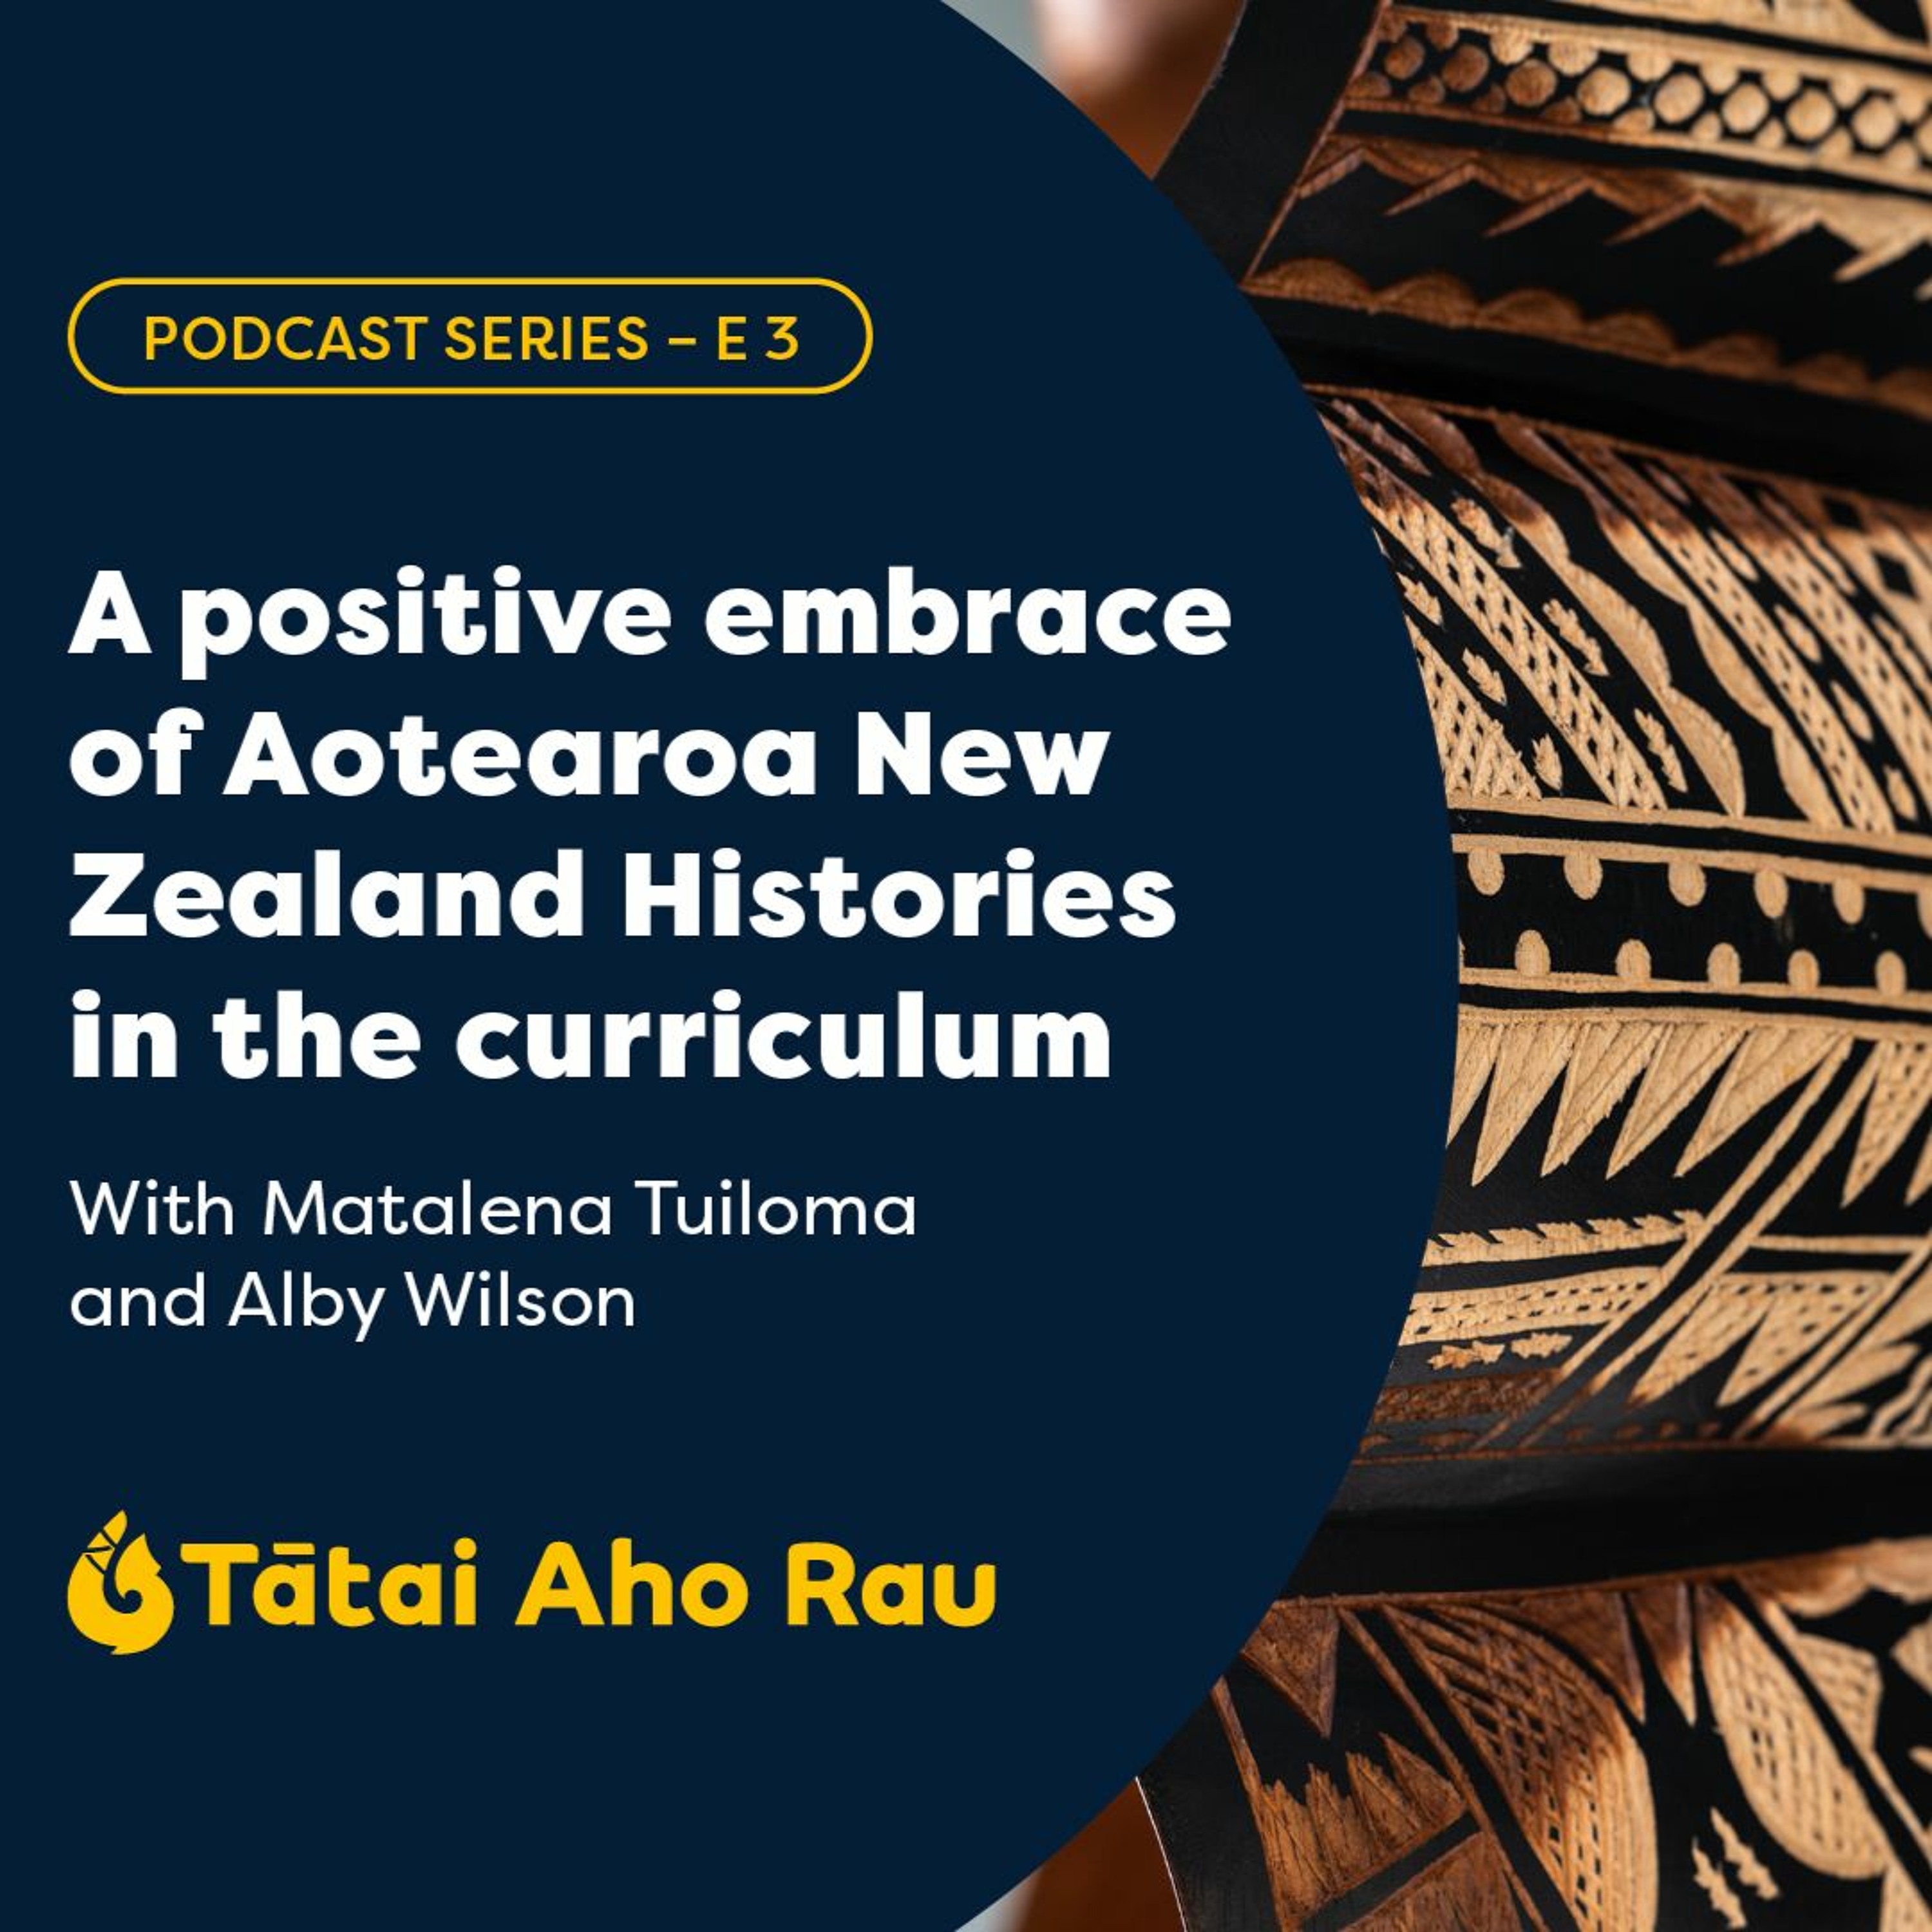 A positive embrace of Aotearoa NZ Histories in the curriculum - Matalena and Alby